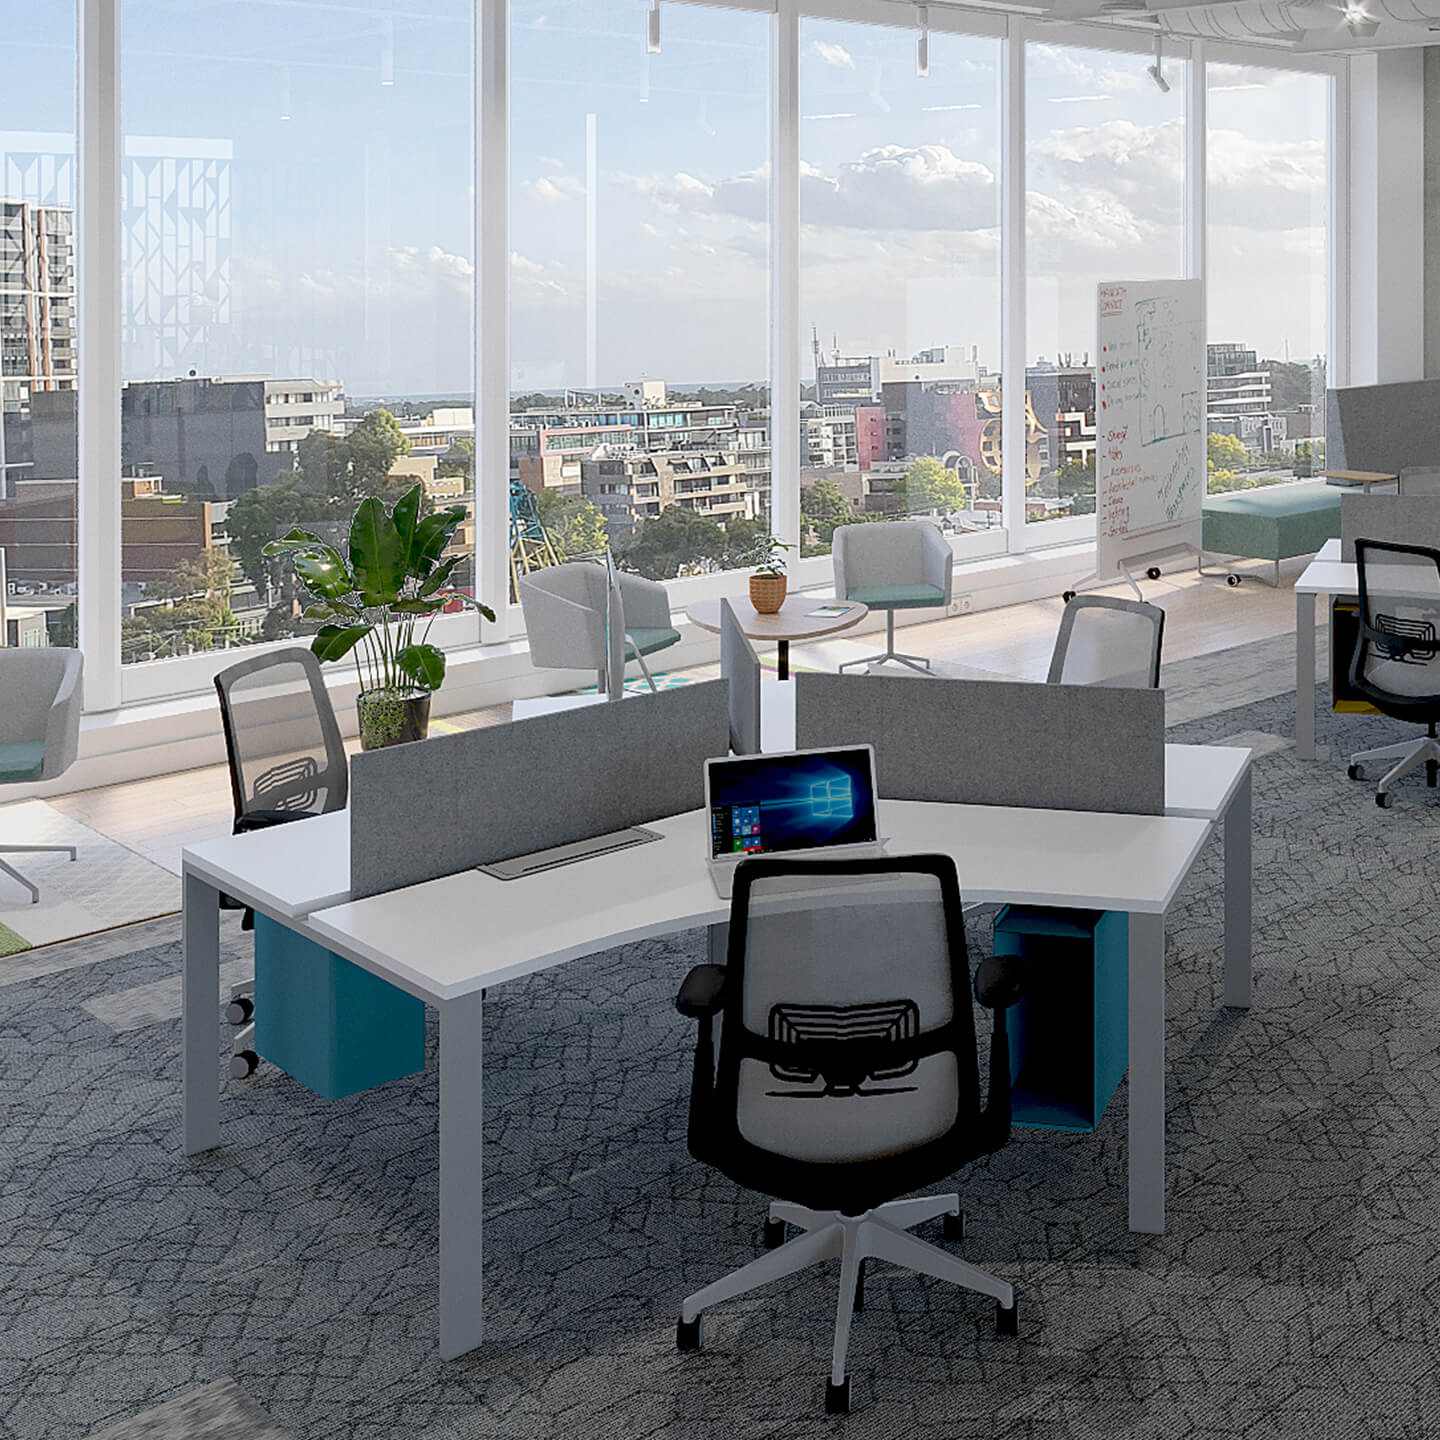 Haworth EZ Workspace partial divider in open office setting with multiple desks with glass windows